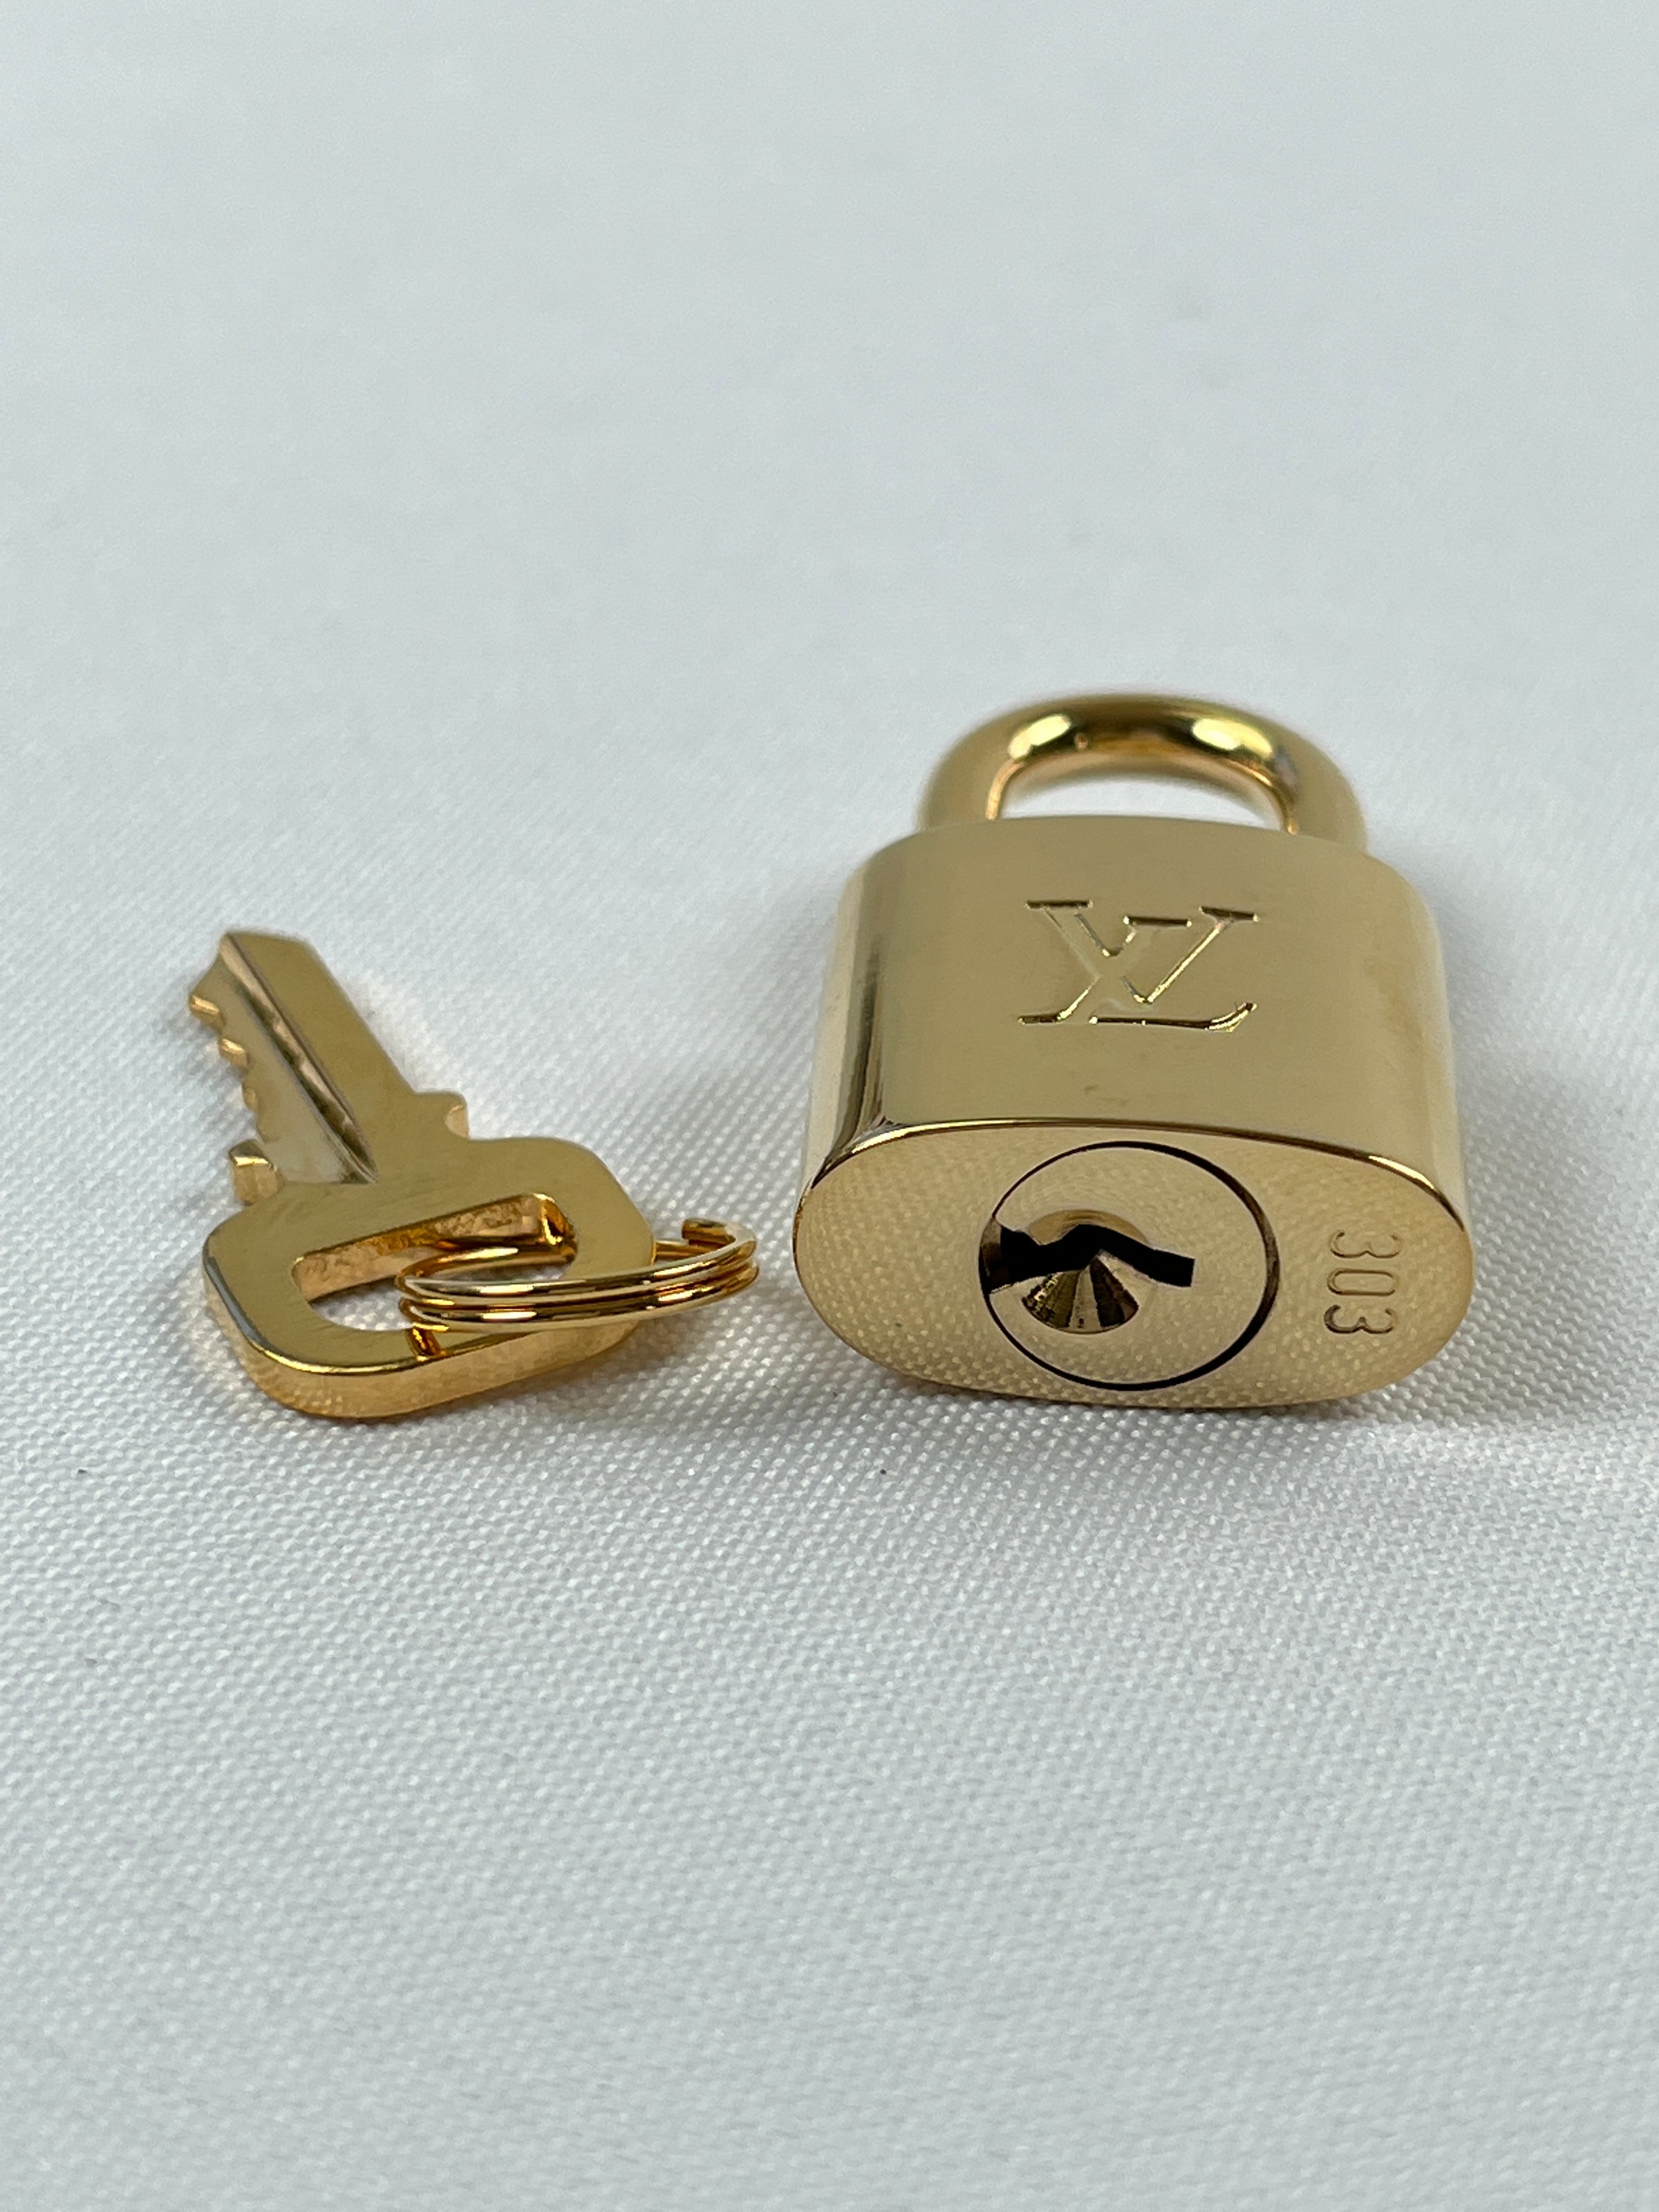 Authentic Louis Vuitton Gold Brass Lock and Key Set 303 